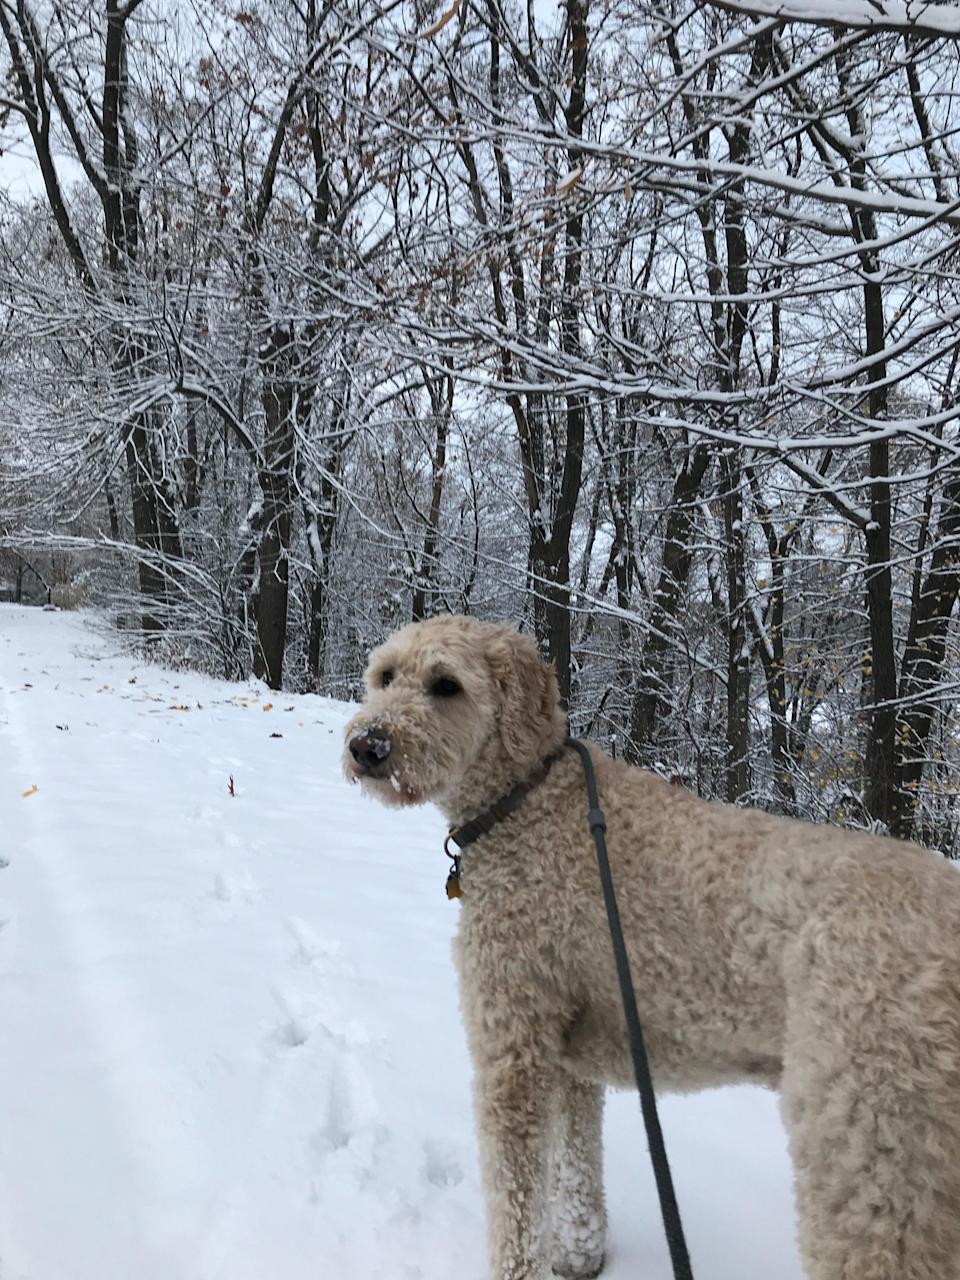 Henry greeted Wausau&#39;s first snowstorm with serene acceptance when we went out for a walk Sunday morning.